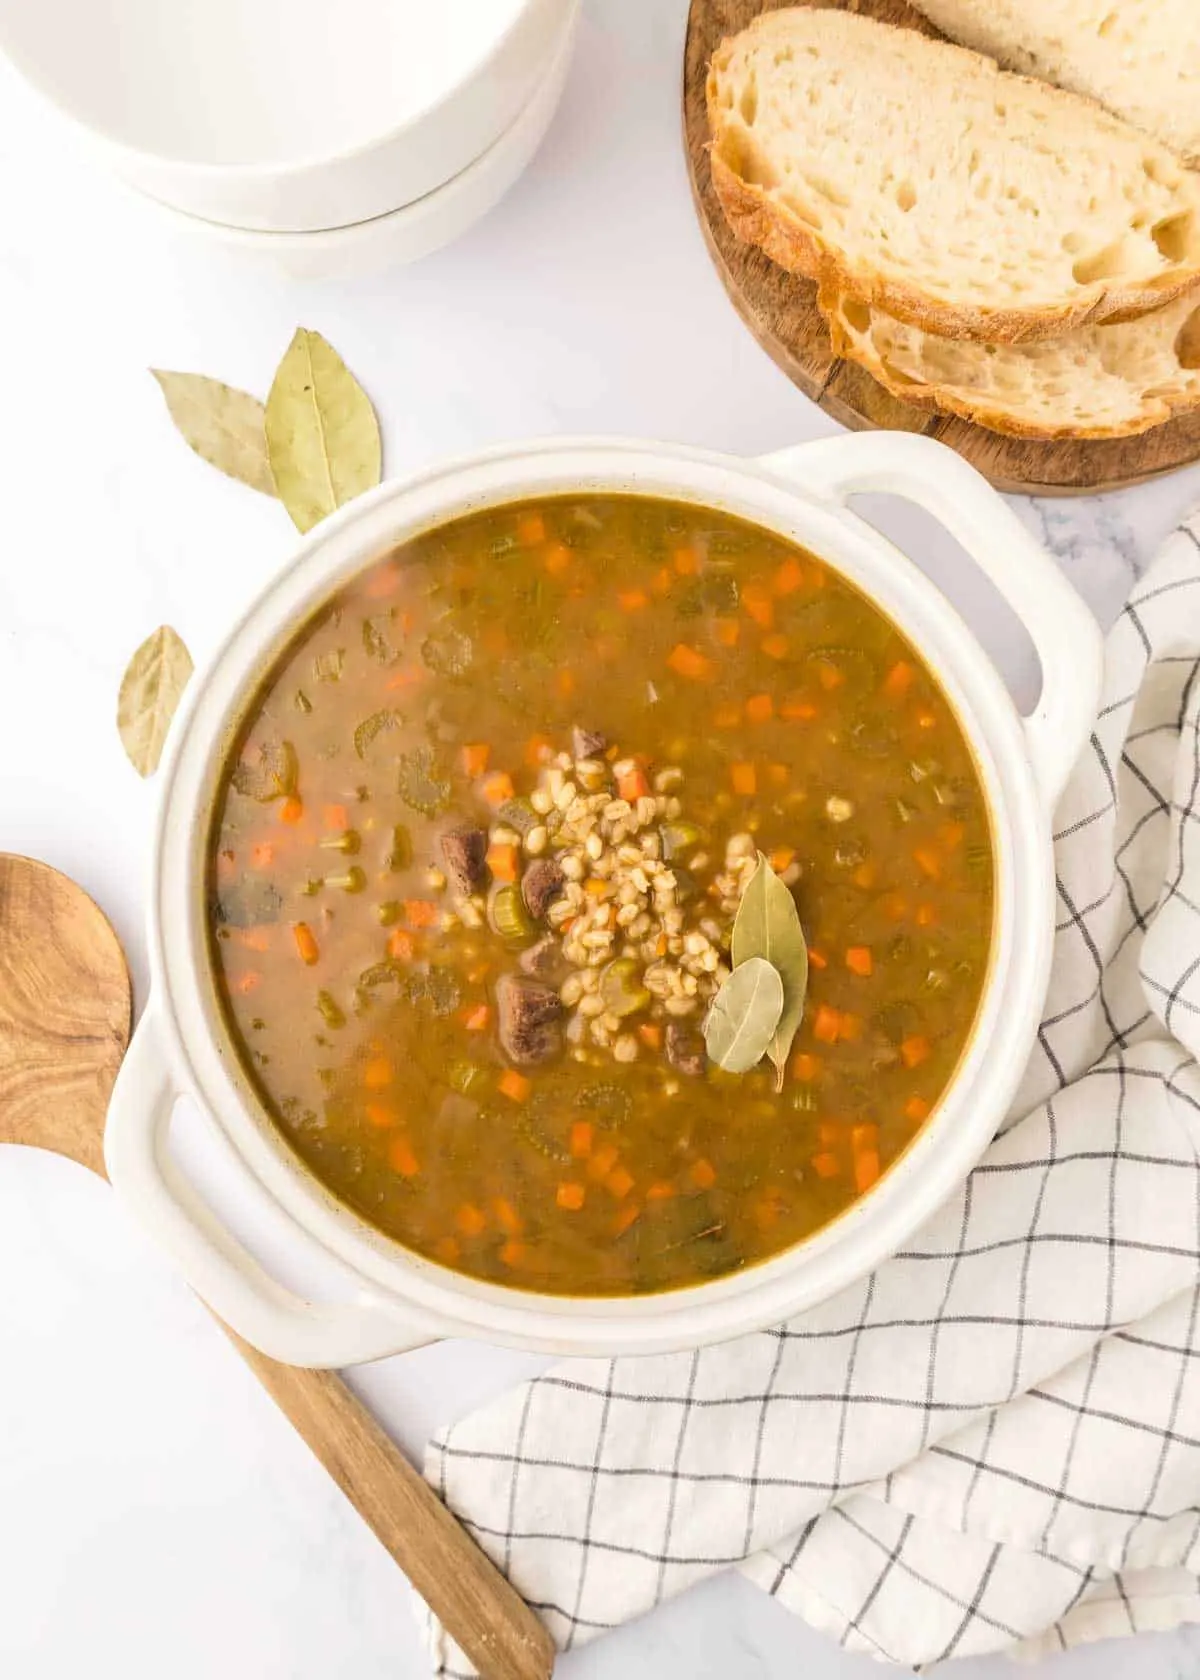 Beef Barley Soup is a hearty soup recipe loaded with chunks of beef, barley, carrots, onion and celery all in a flavourful beef broth with red wine.